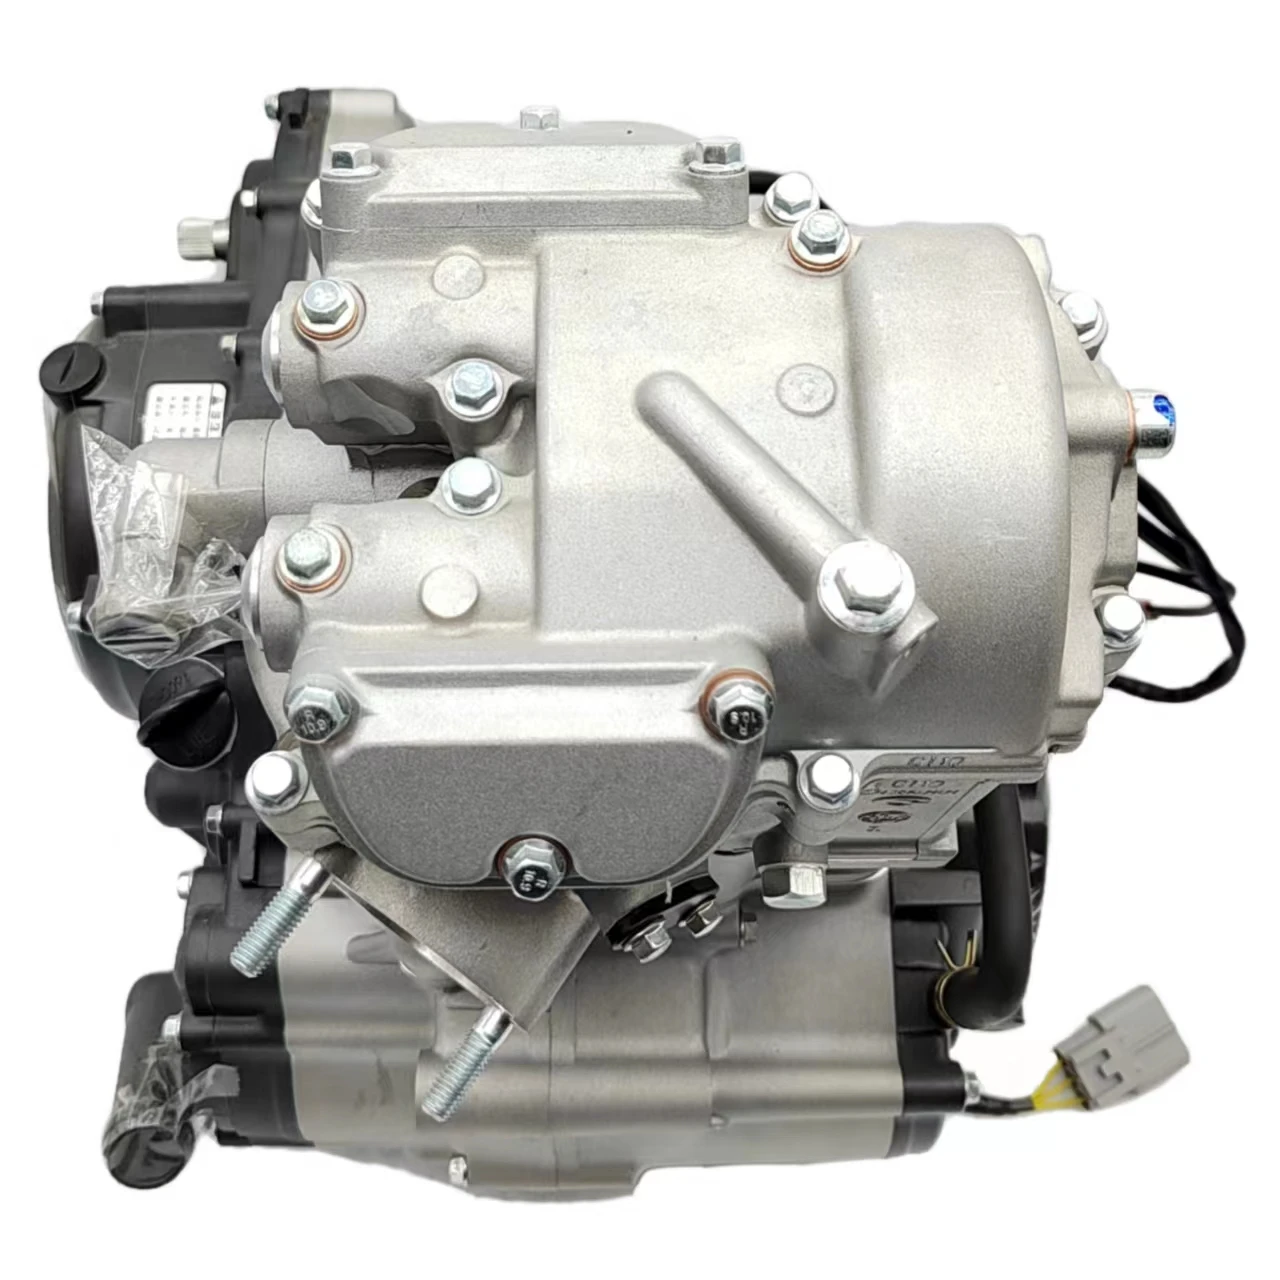 OEM factory shop Zongshen NC450 engine EFI water-cooled engine Zongshen 450cc RX4 engine, 6 gears for off-rd motorcyclesoa